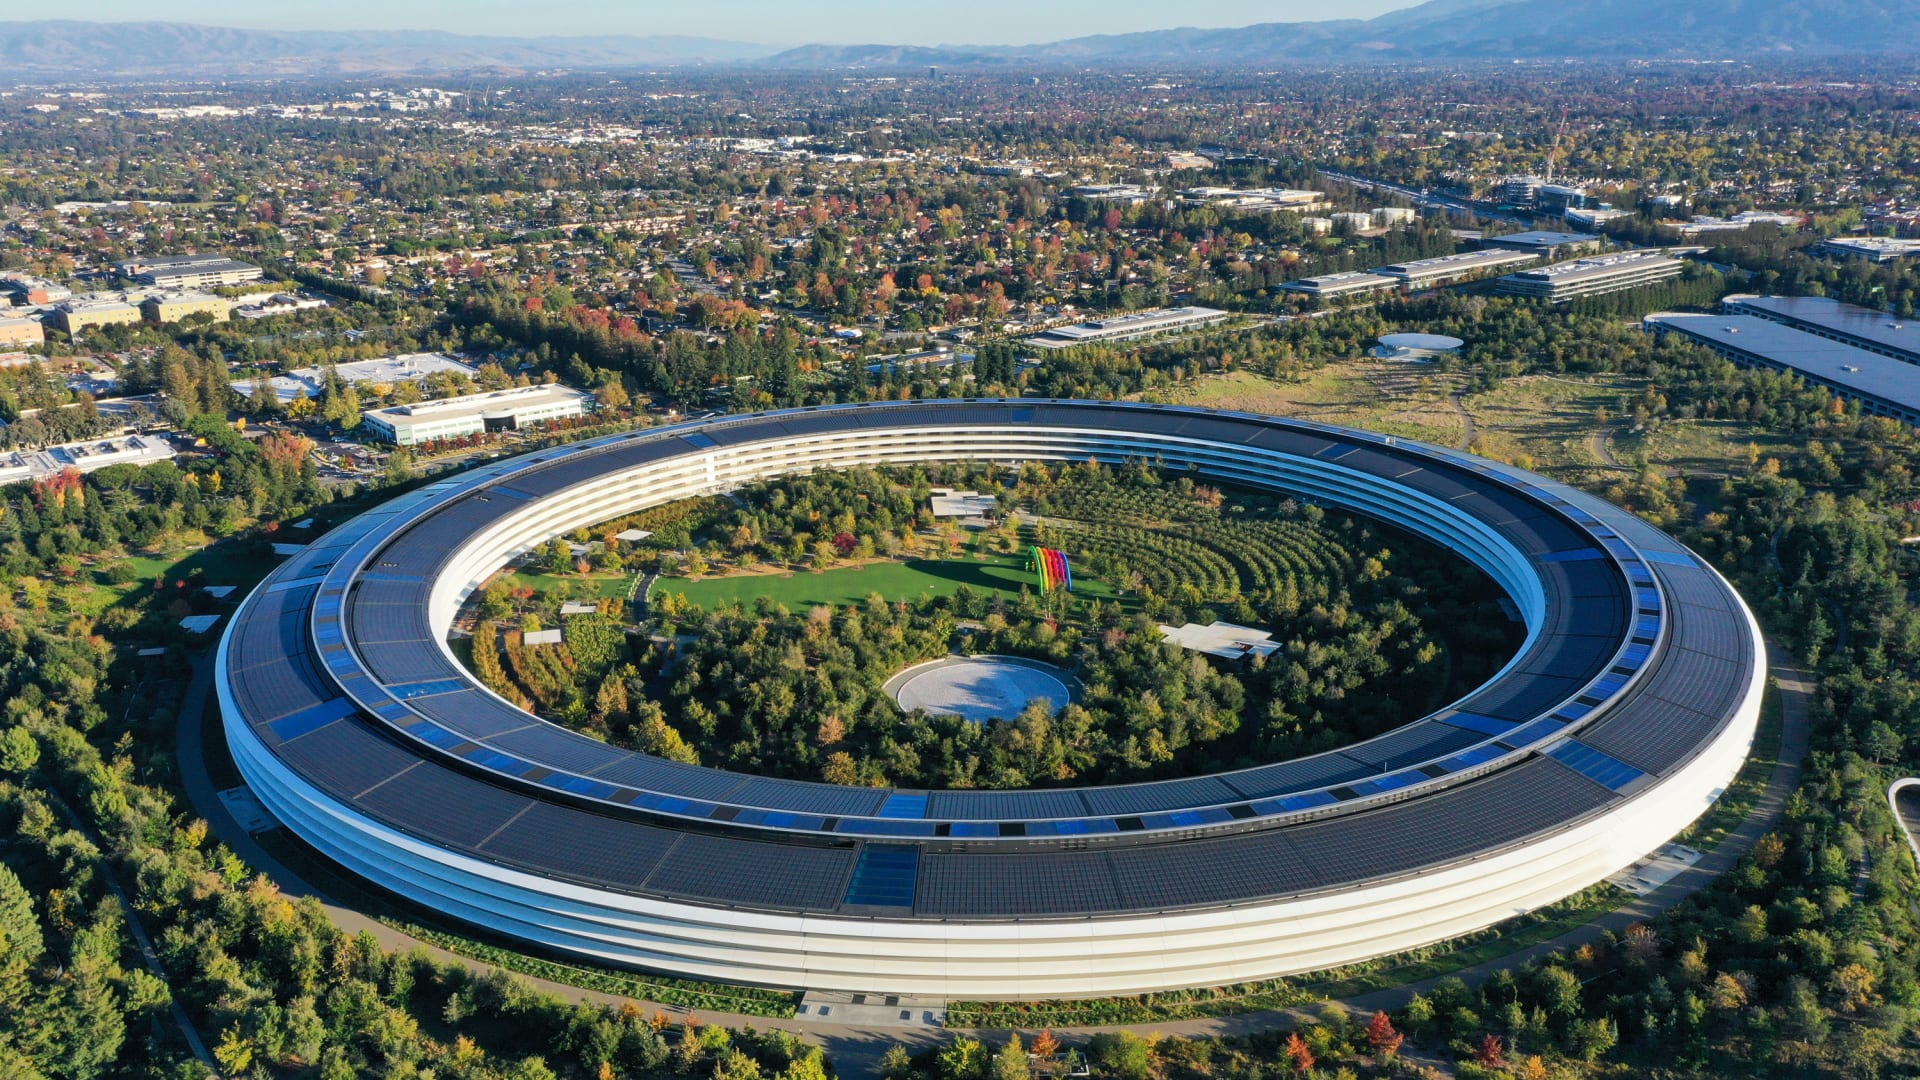 does apple headquarters do tours